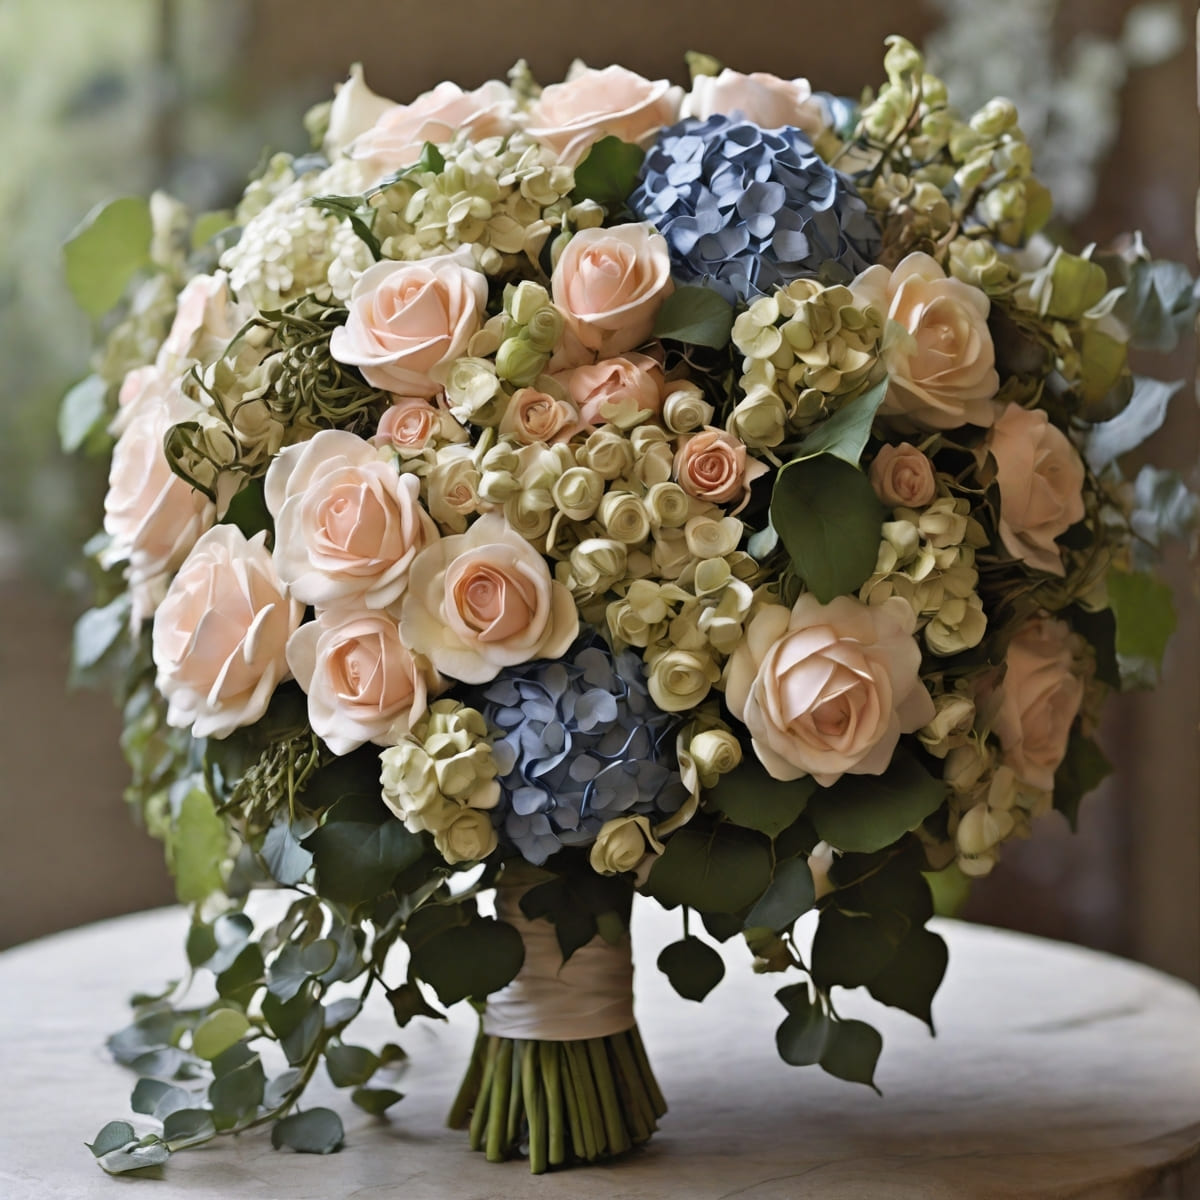 Playful Extravagance with Oversized Bouquets